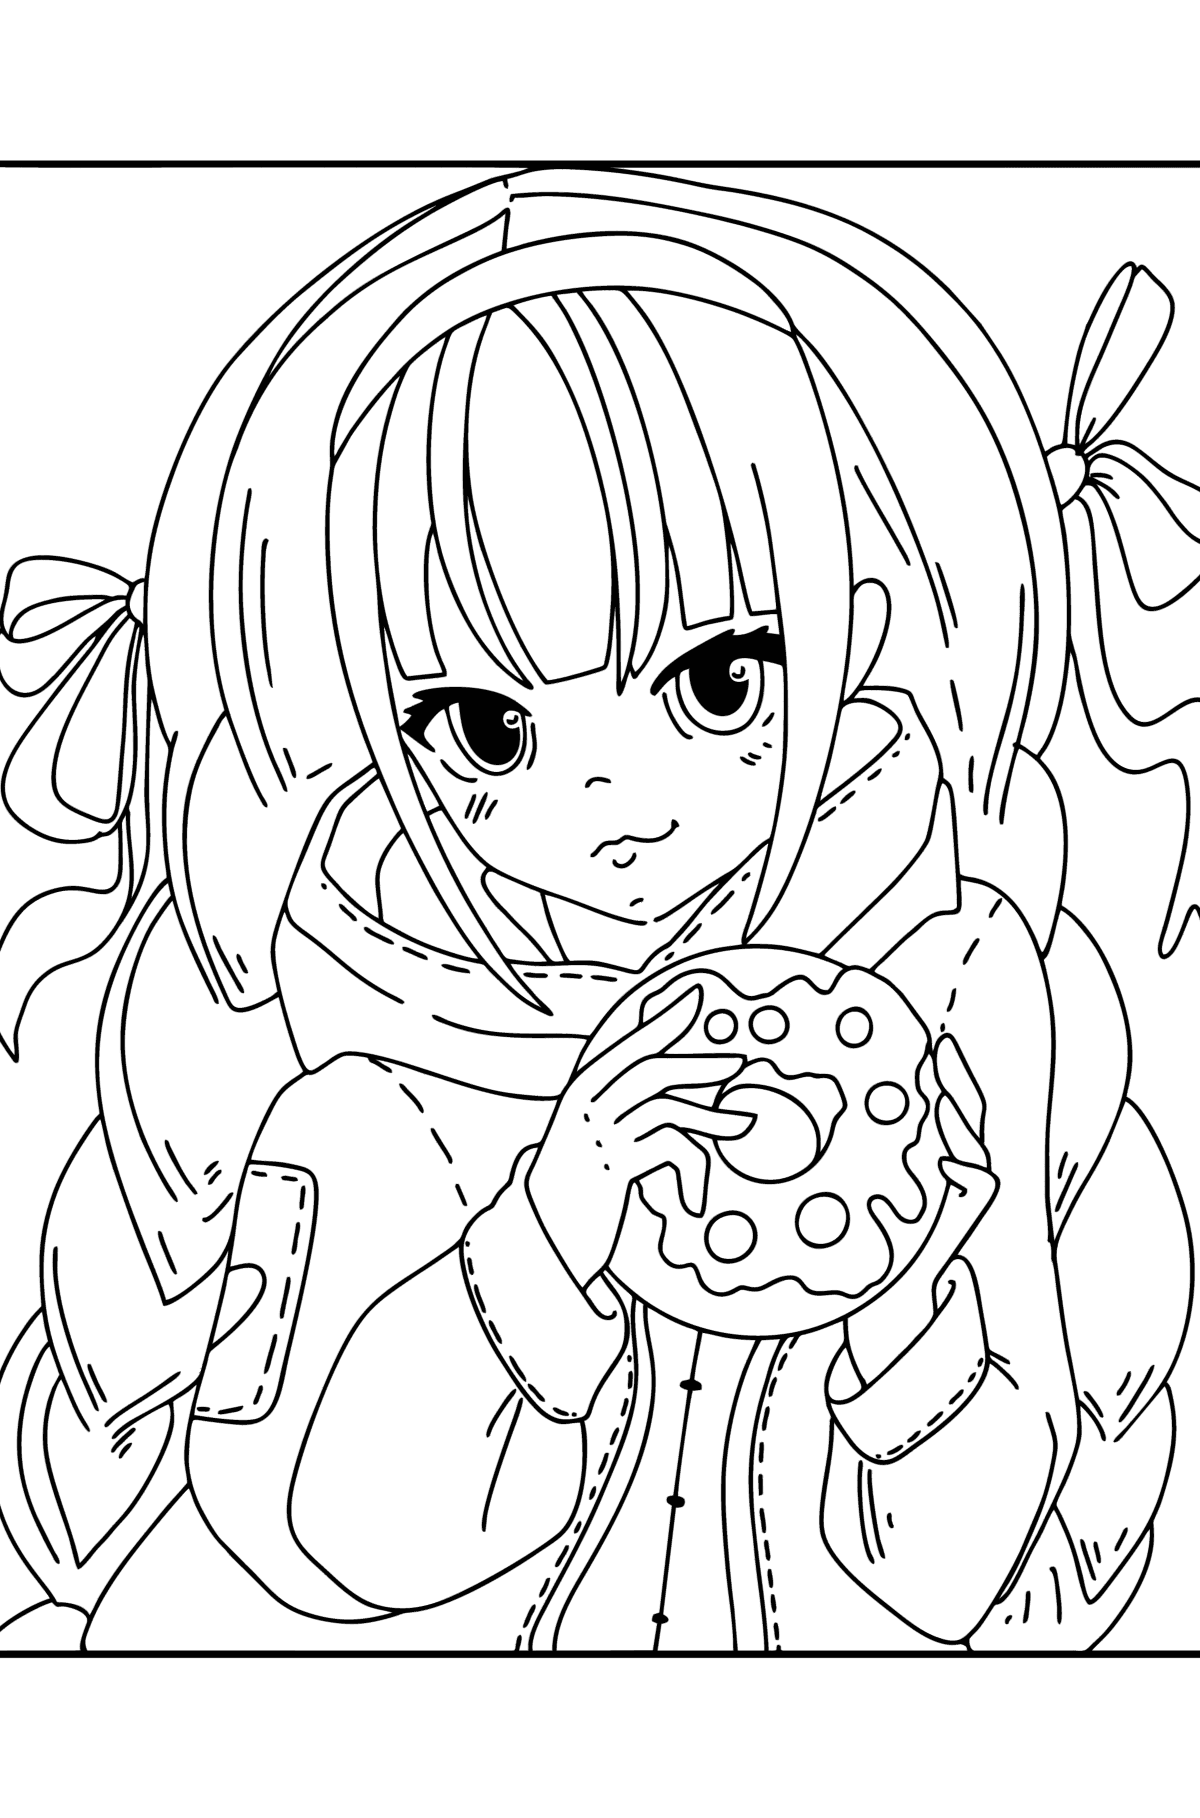 Japanese anime girl coloring page ♥ Online and Print for Free